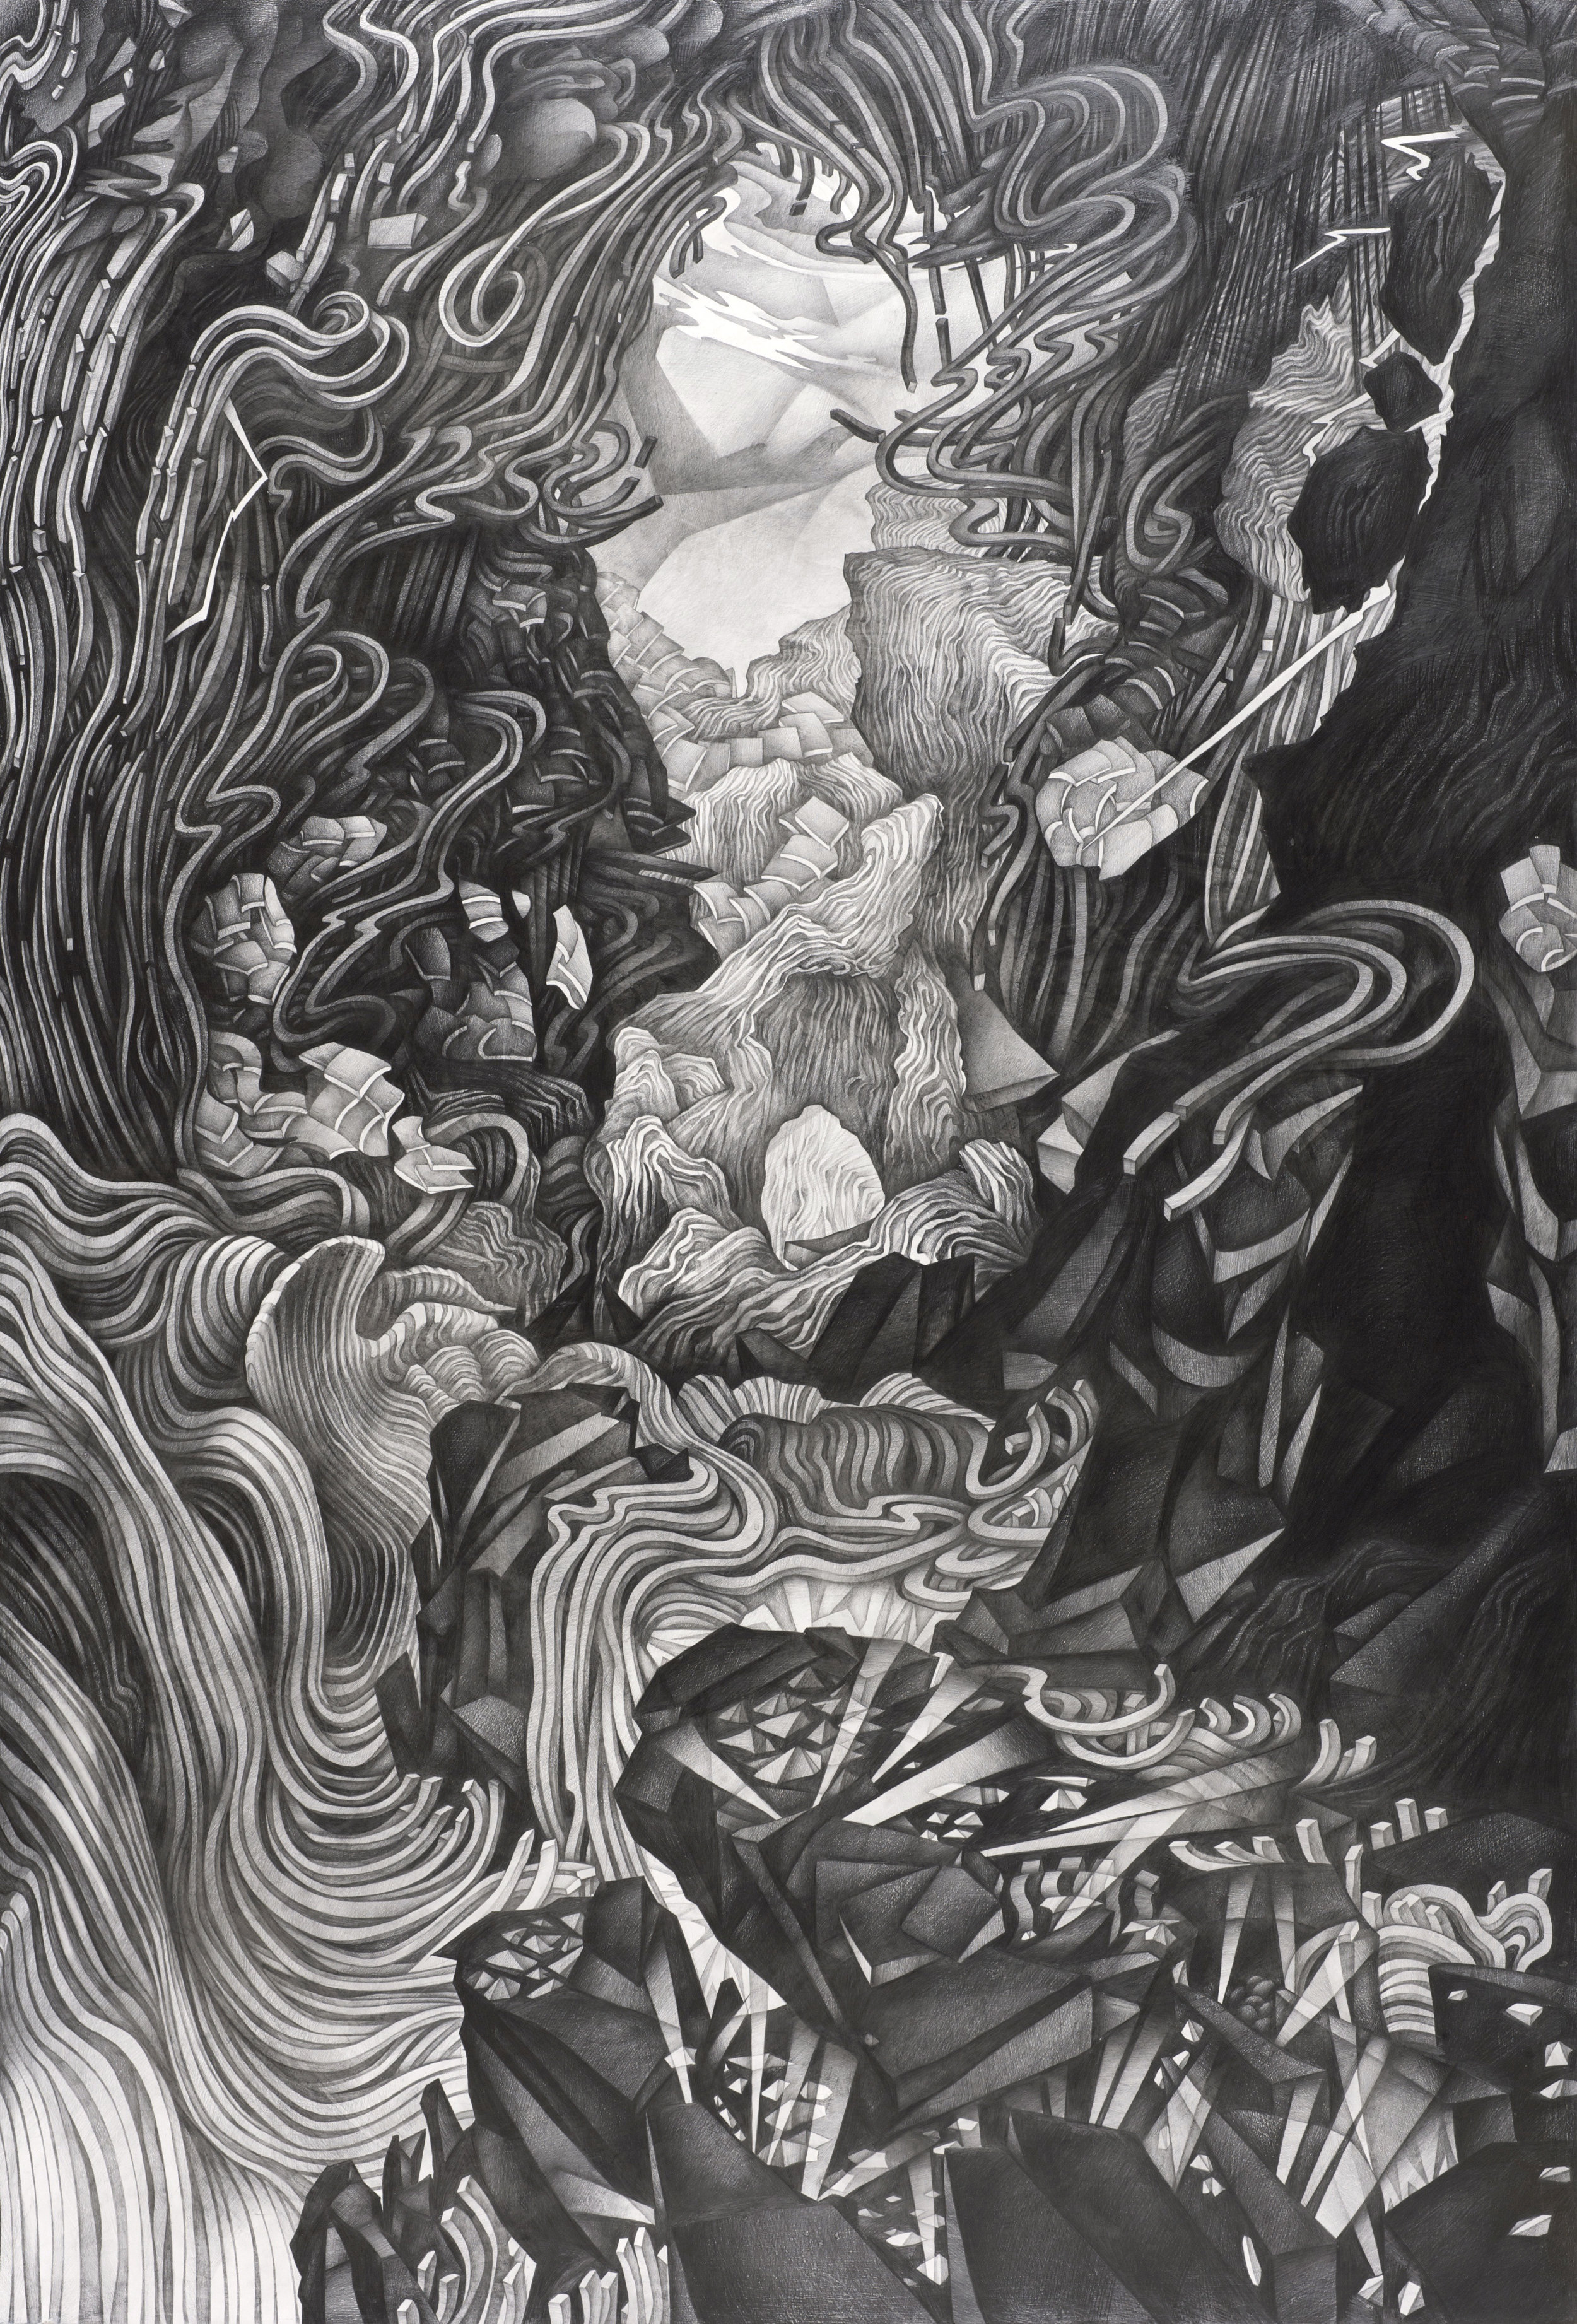   Disassembling Landscape II , 2013 Graphite on panel 72 x 49 inches 